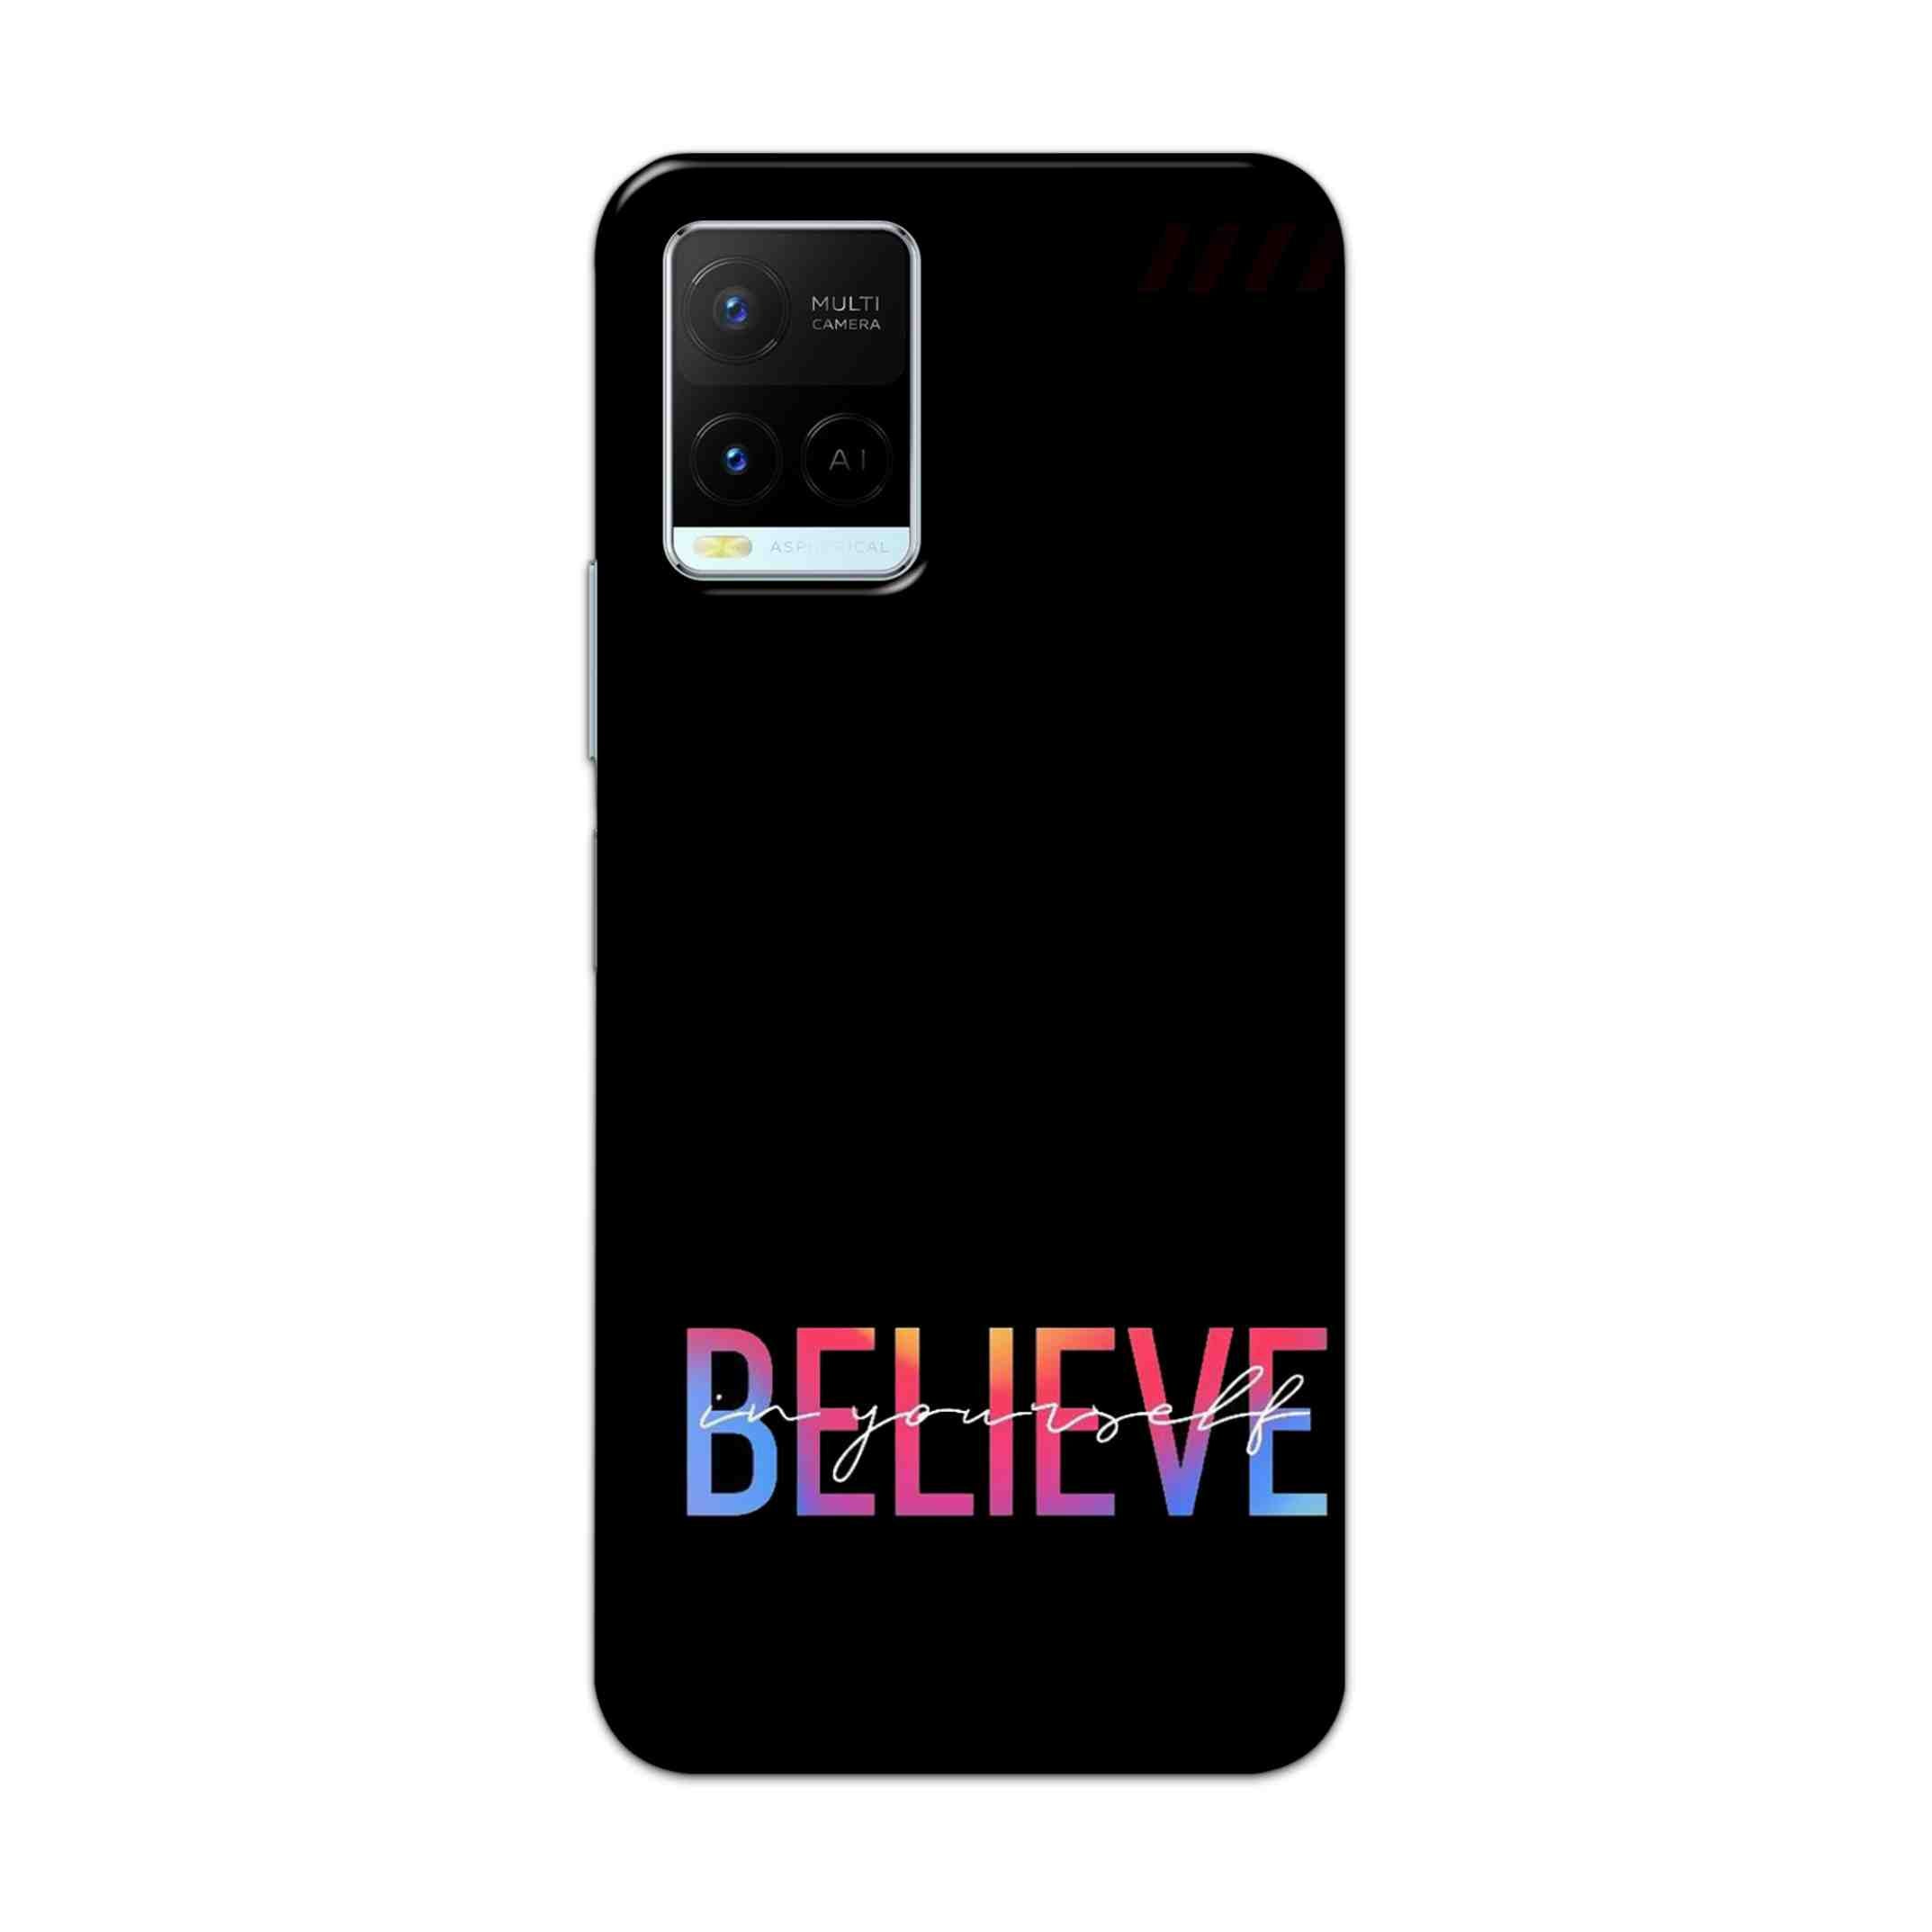 Buy Believe Hard Back Mobile Phone Case Cover For Vivo Y21 2021 Online